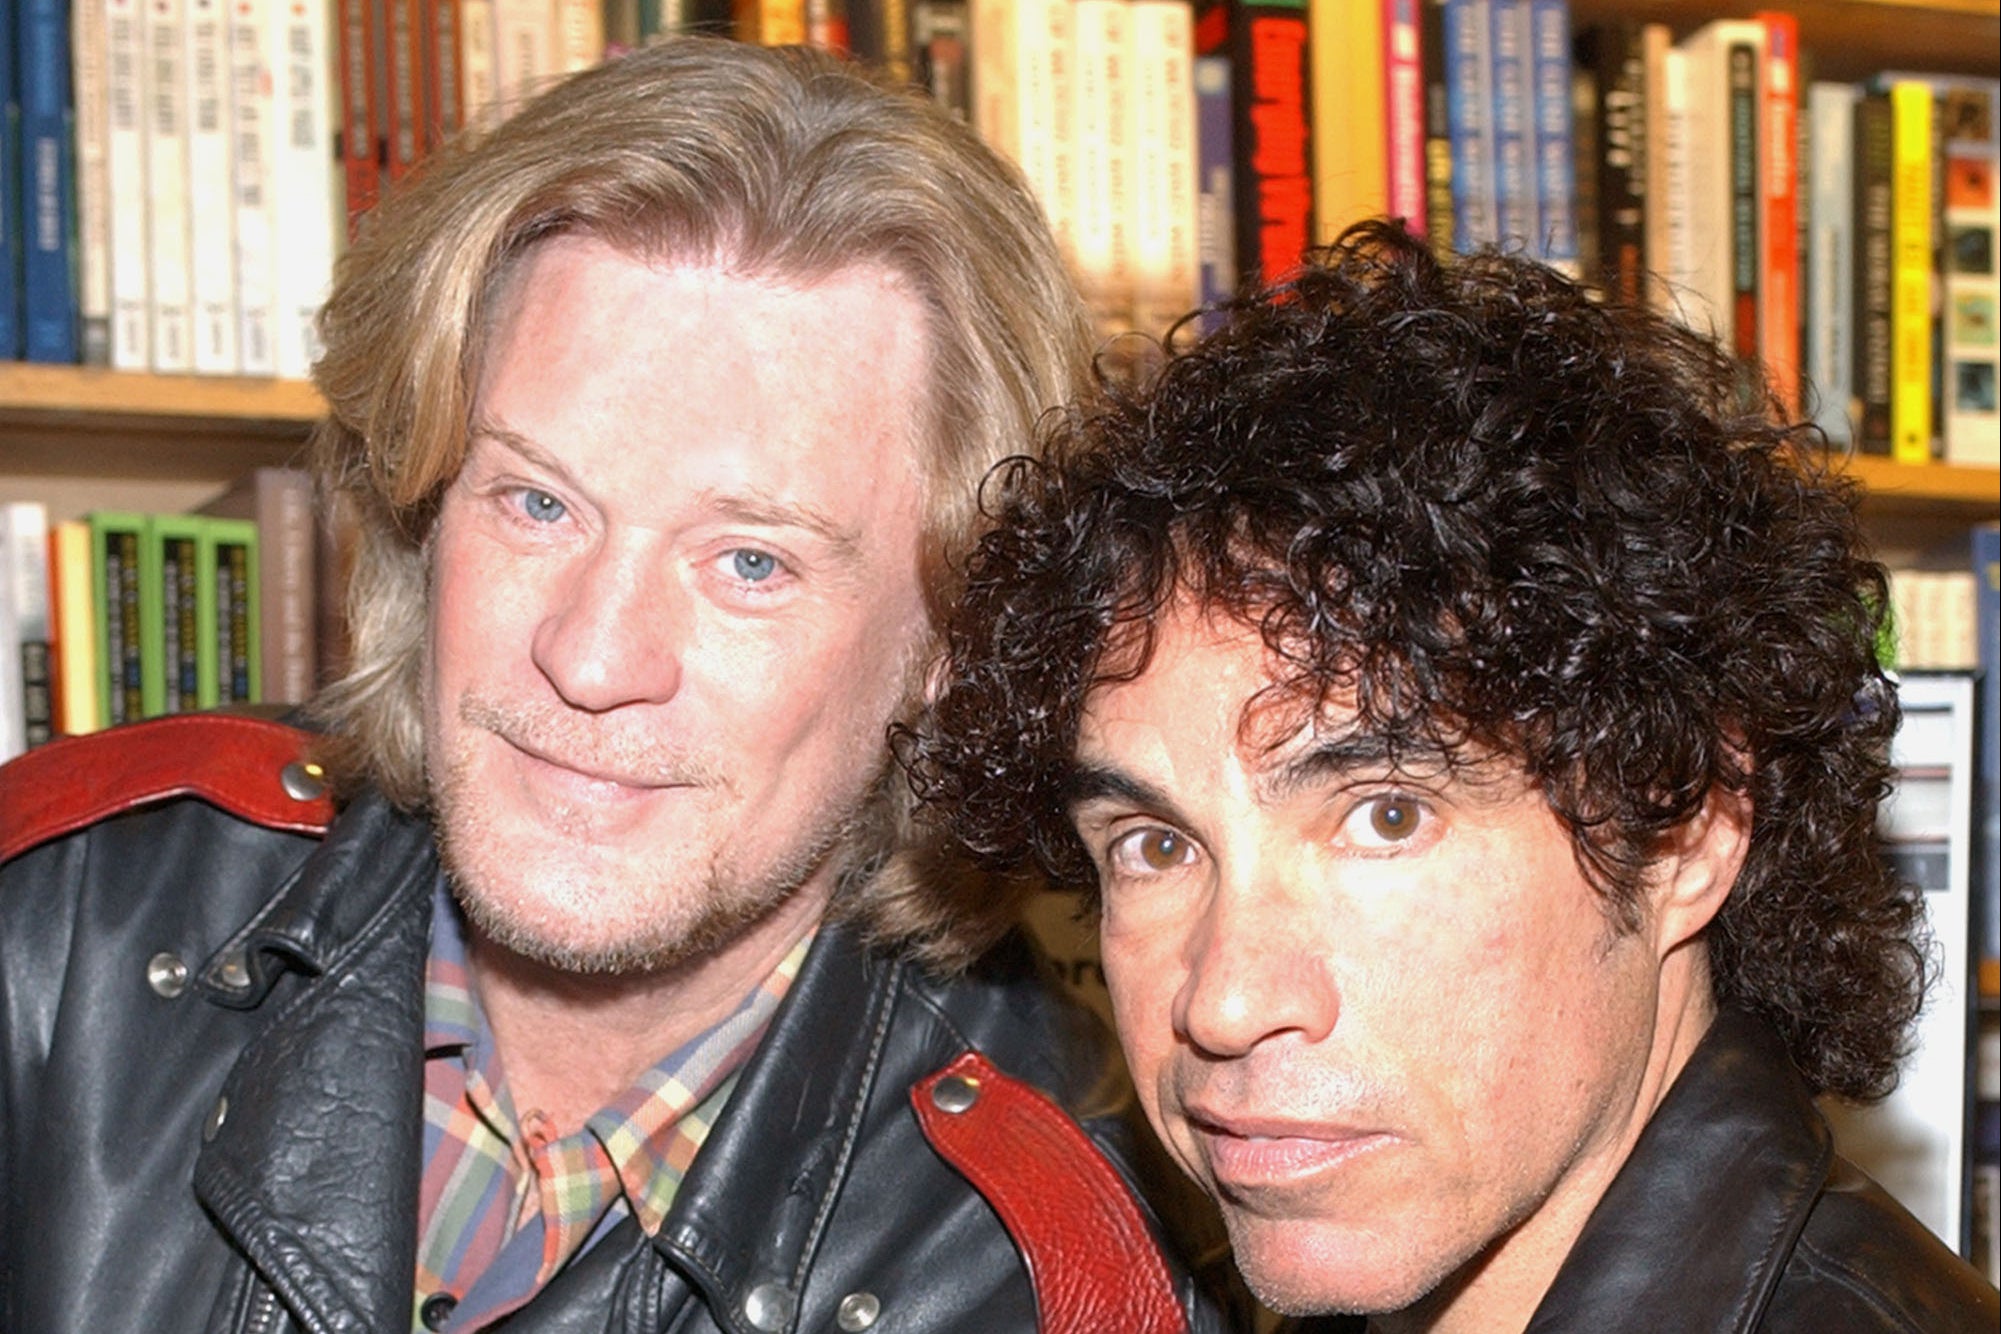 daryl hall, lawsuit, hall & oates: daryl hall files lawsuit and restraining order against john oates